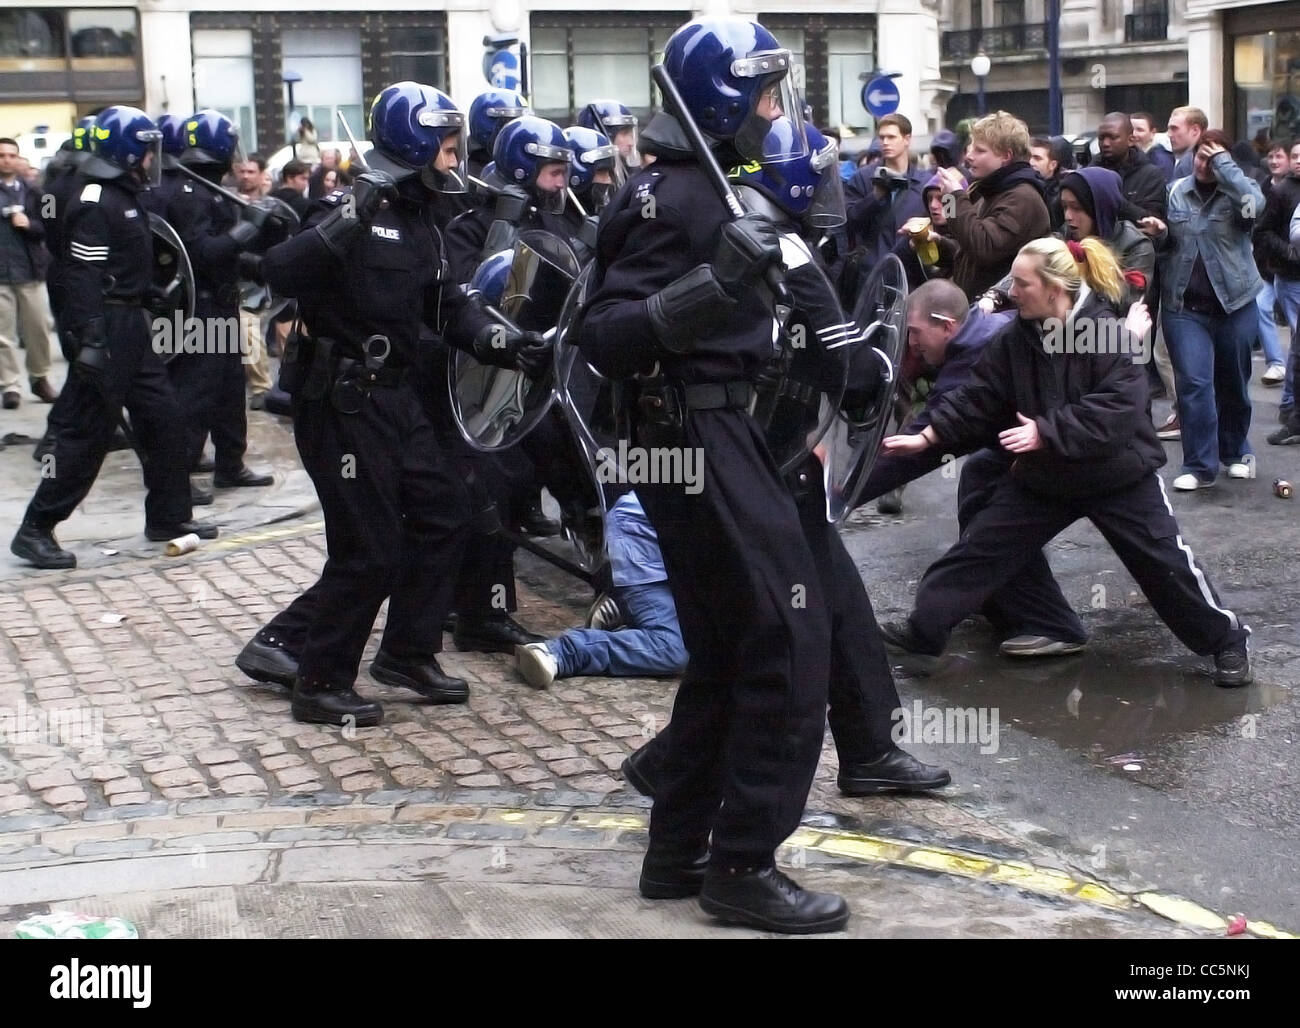 british-uk-riot-police-editorial-use-only-CCNKJ